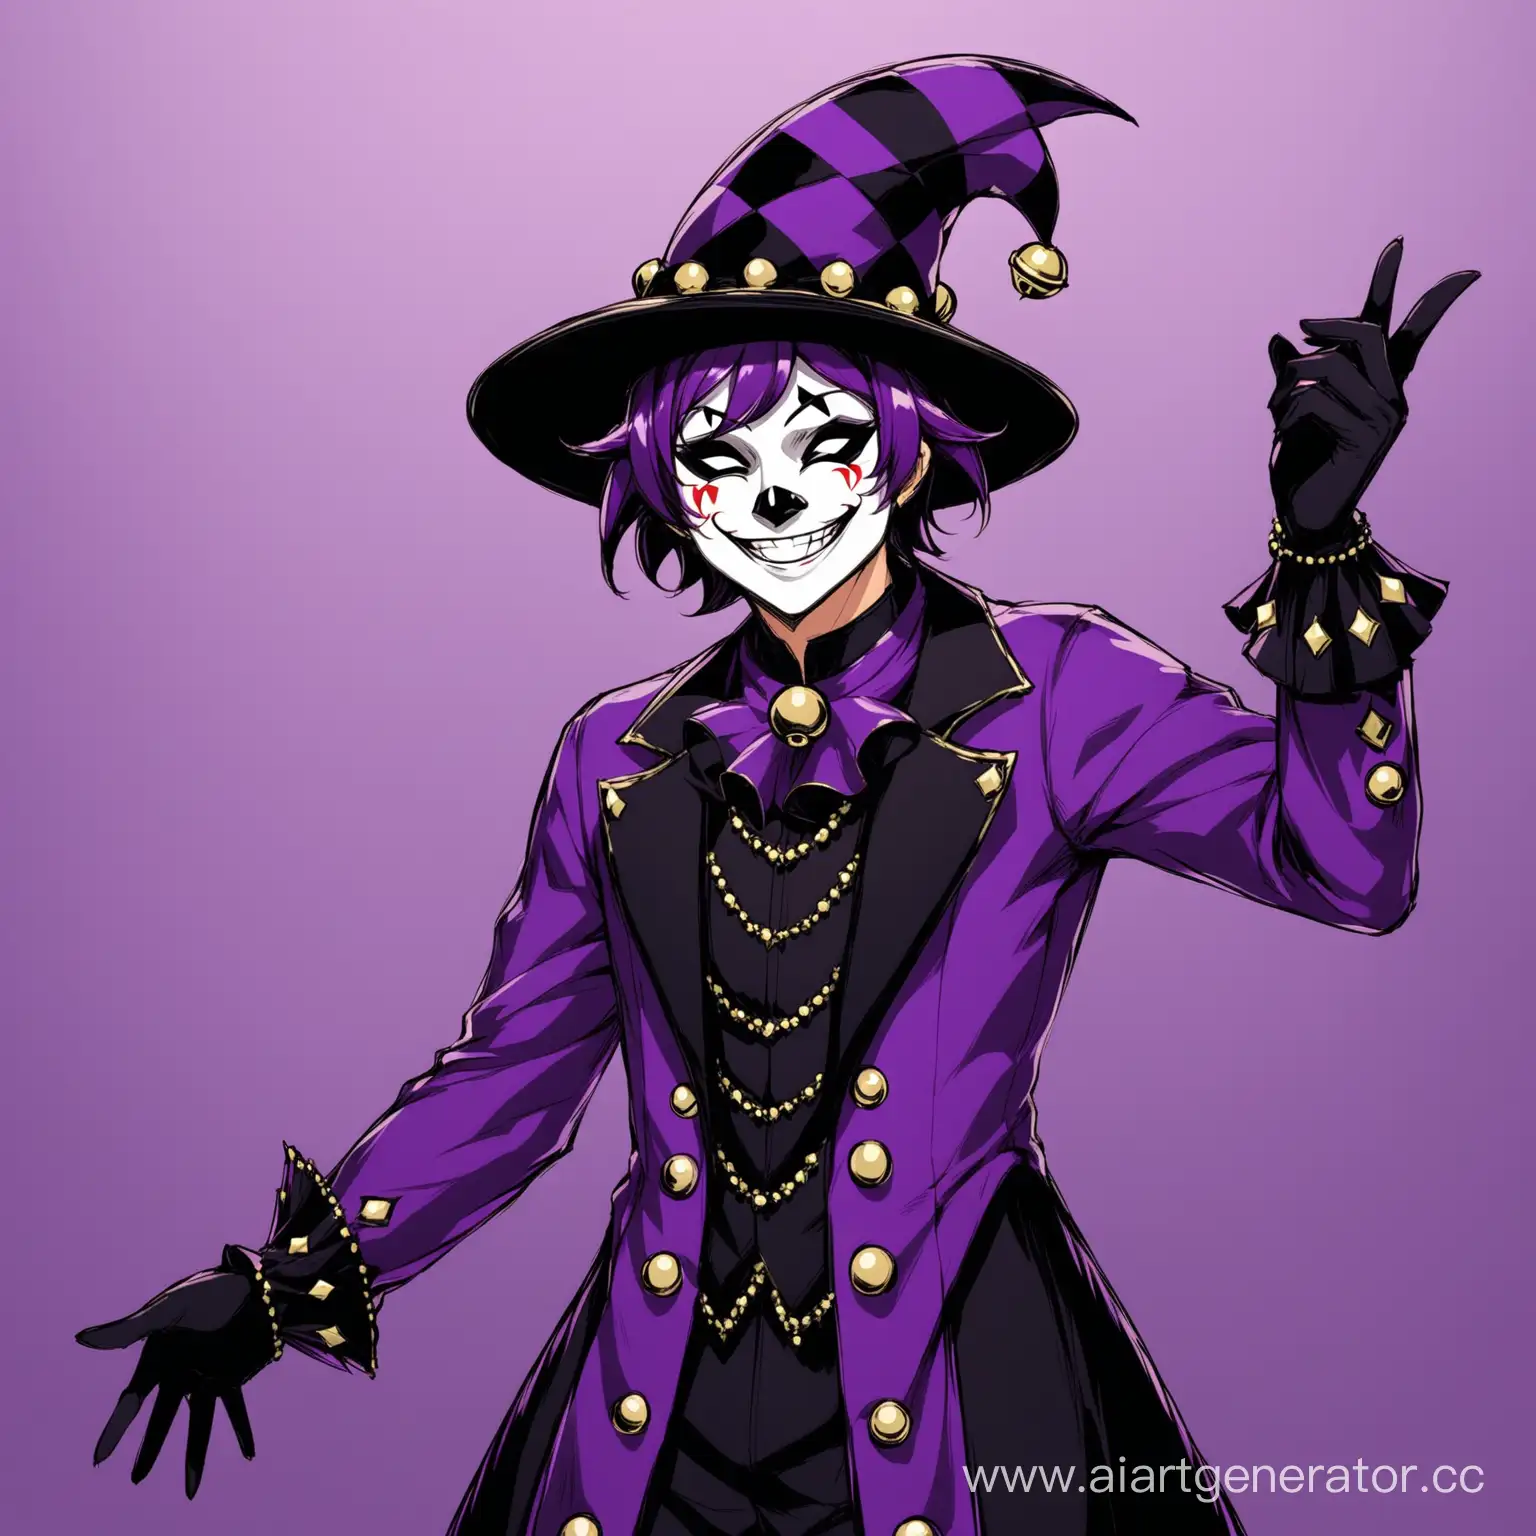 Anime-Jester-in-Black-and-Dark-Purple-Costume-with-Bells-and-Mask